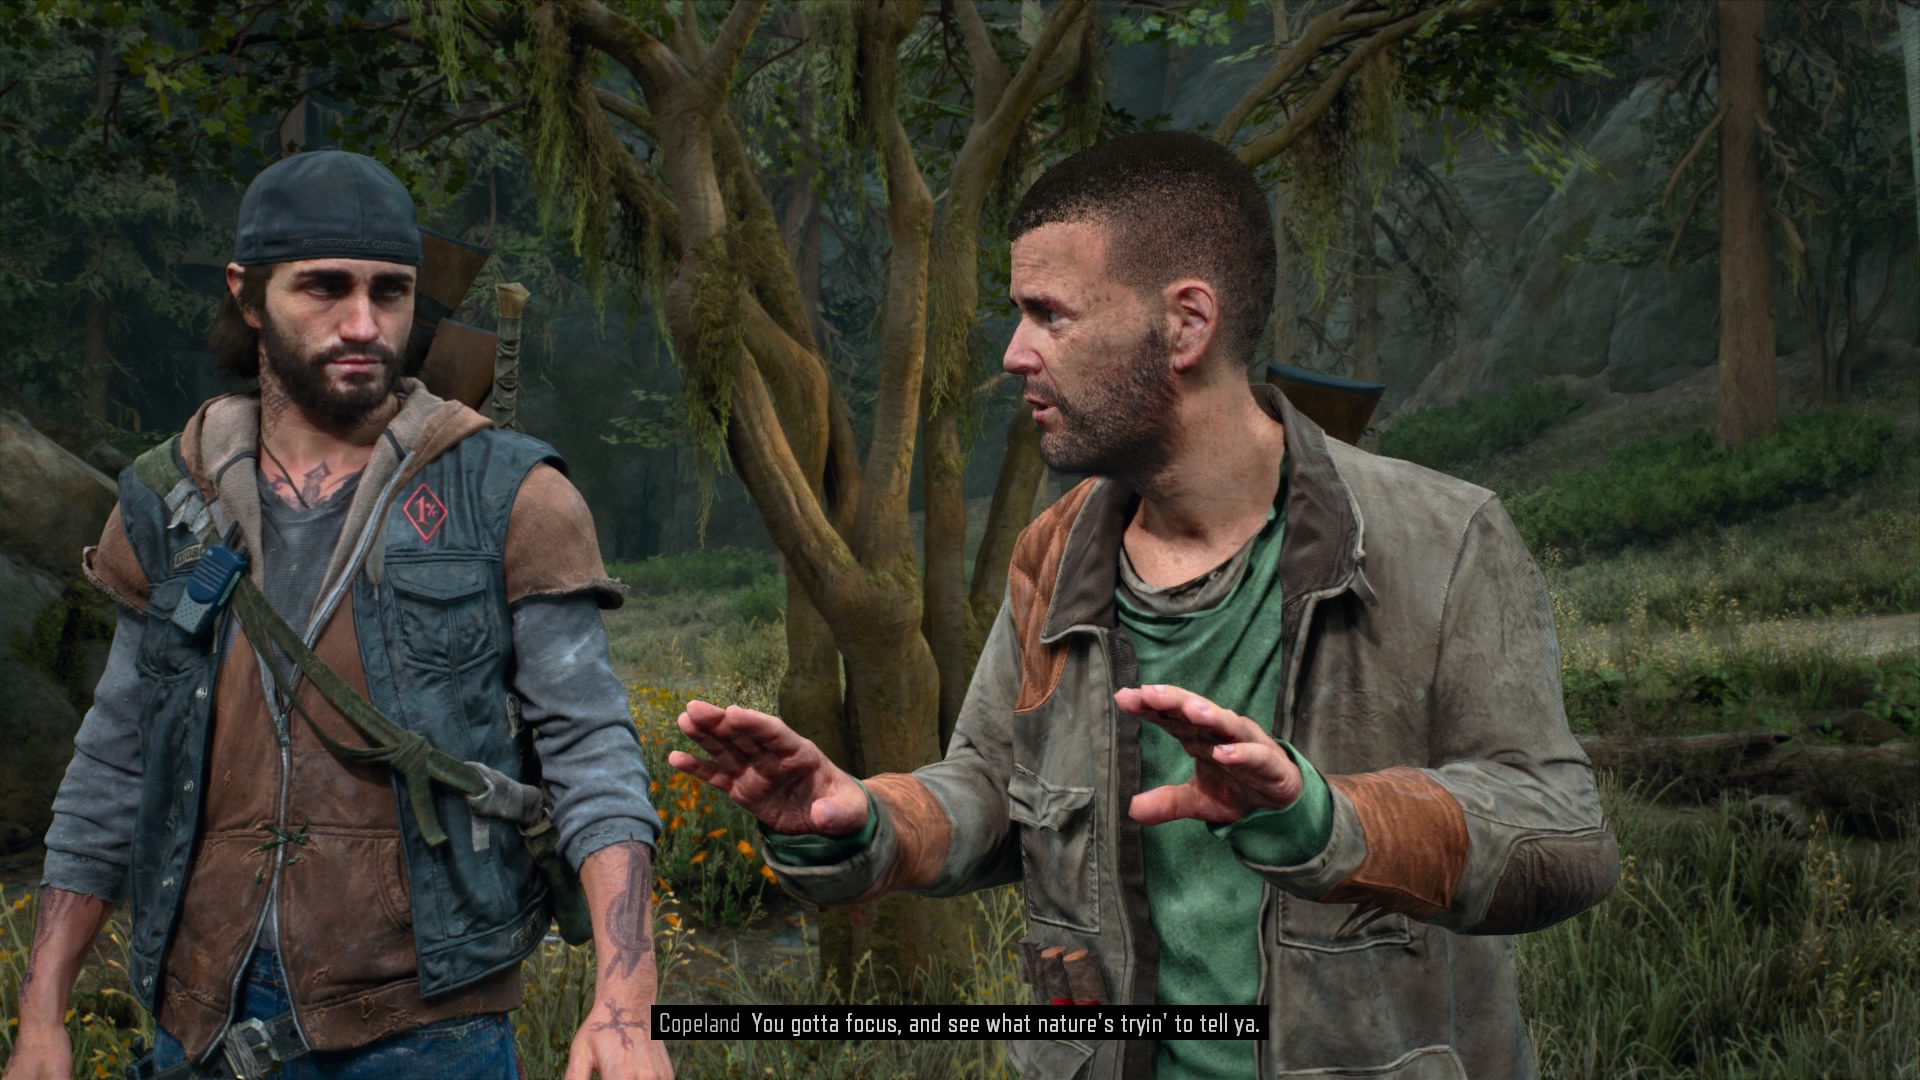 Days Gone fans say newcomers shouldn't be deterred by 'mediocre' reviews